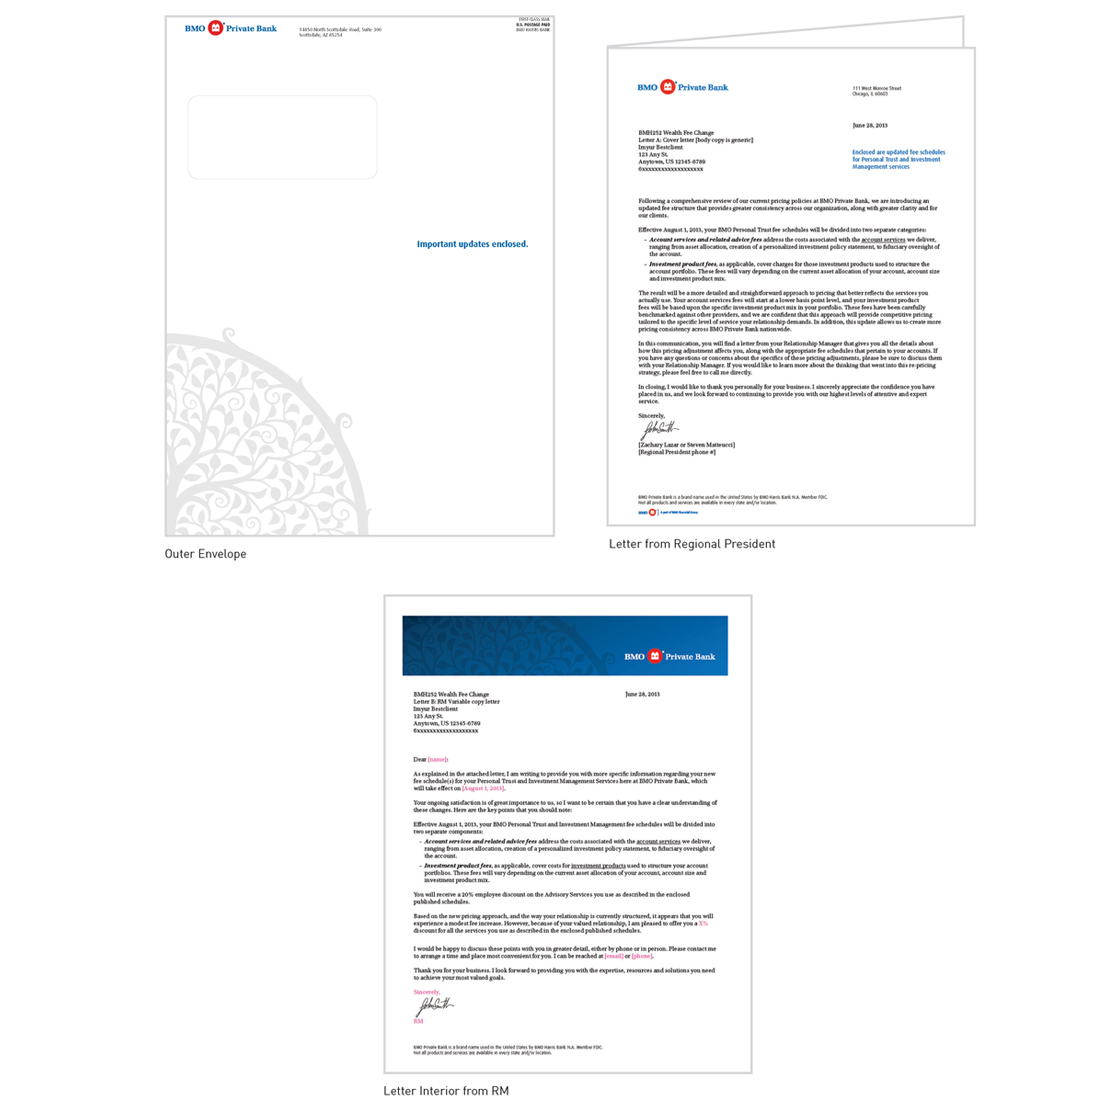 BMO Private Bank outer envelope, letter from Regional President, and letter from Relationship Manager